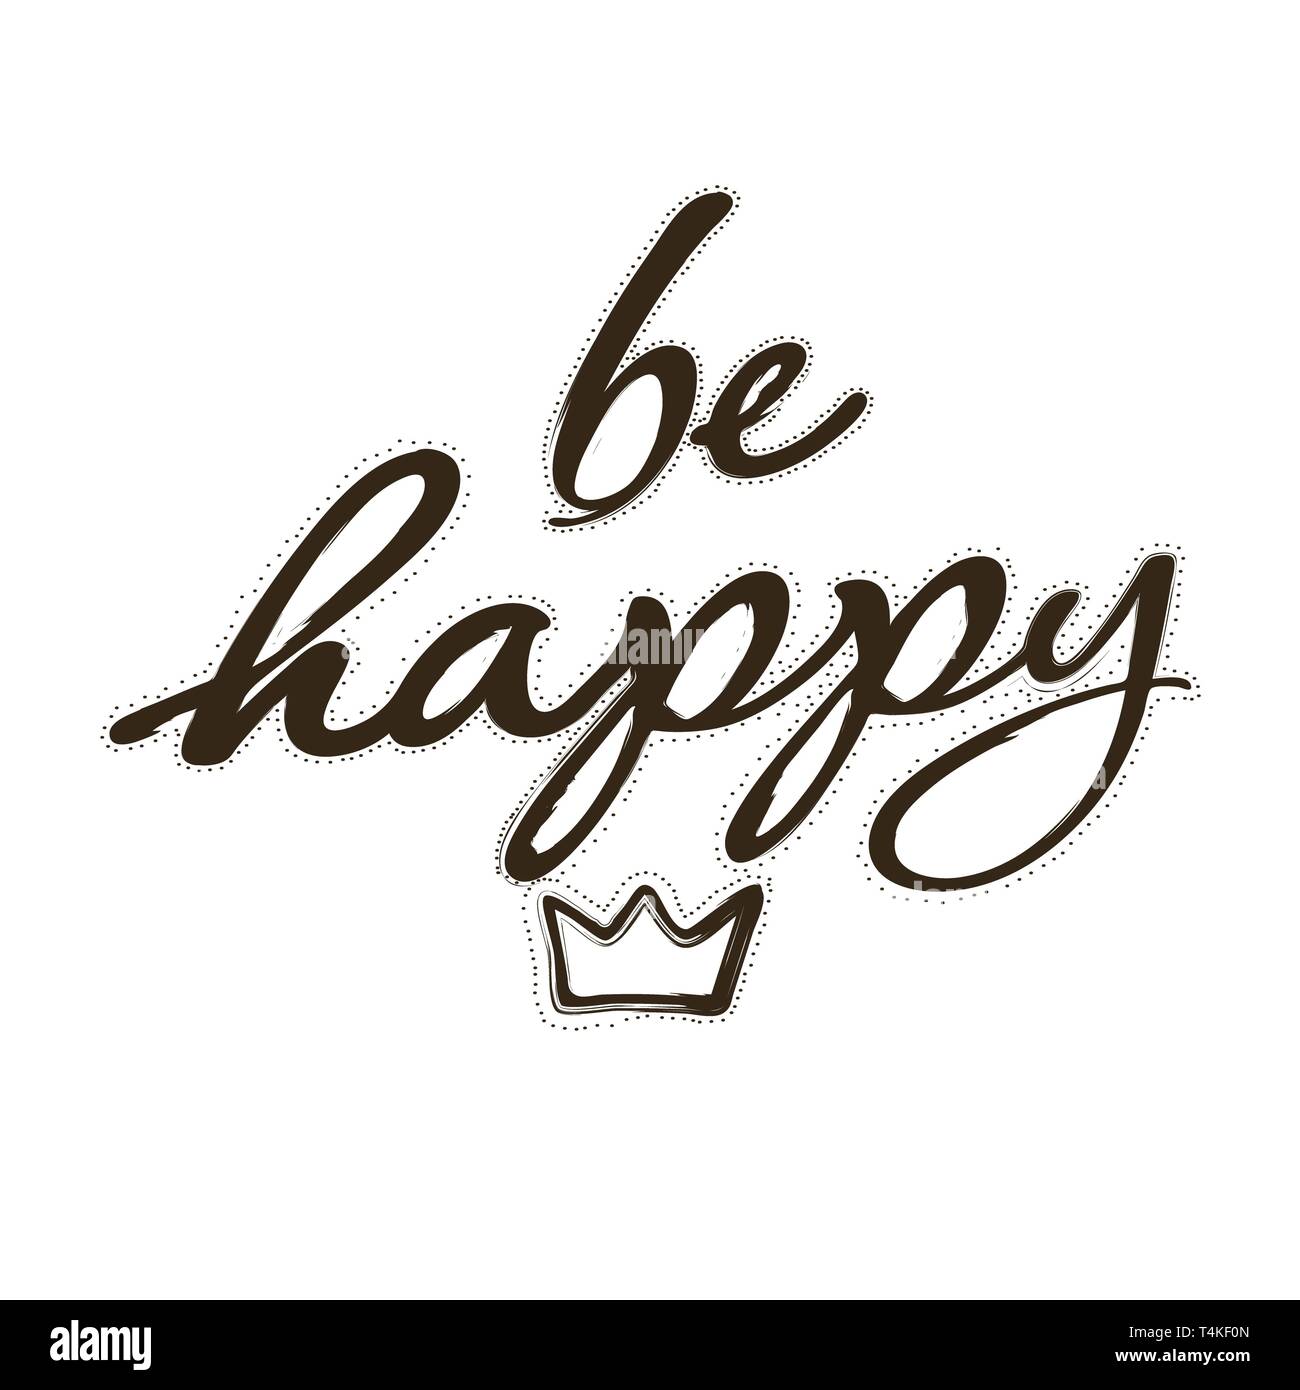 Be happy. Isolated Lettering, word processing. Be happy for prints on clothing, t-shirts, bags, banner, sticker. Stock Photo